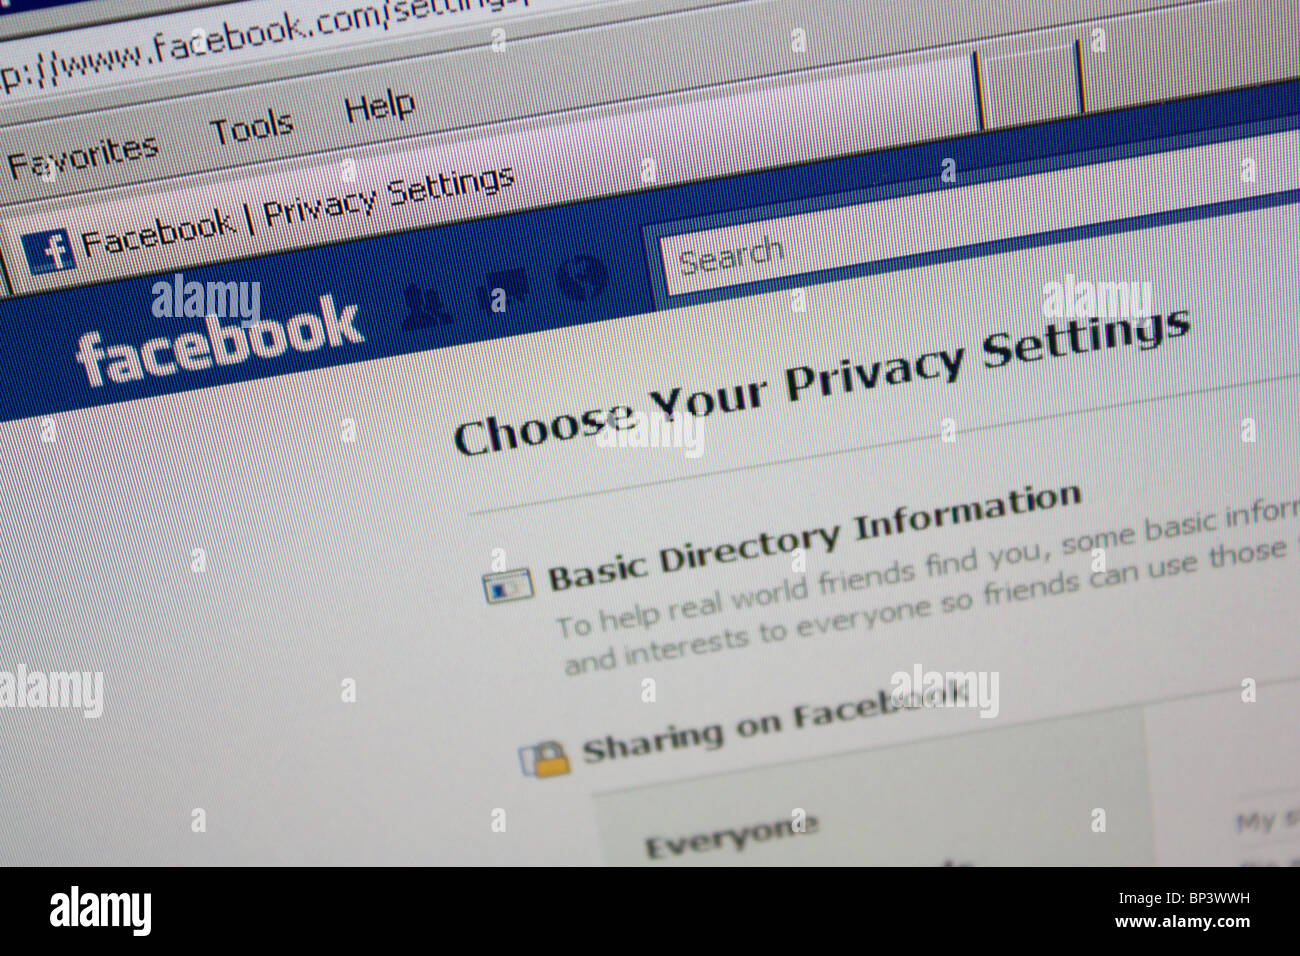 facebook choose your privacy settings Stock Photo